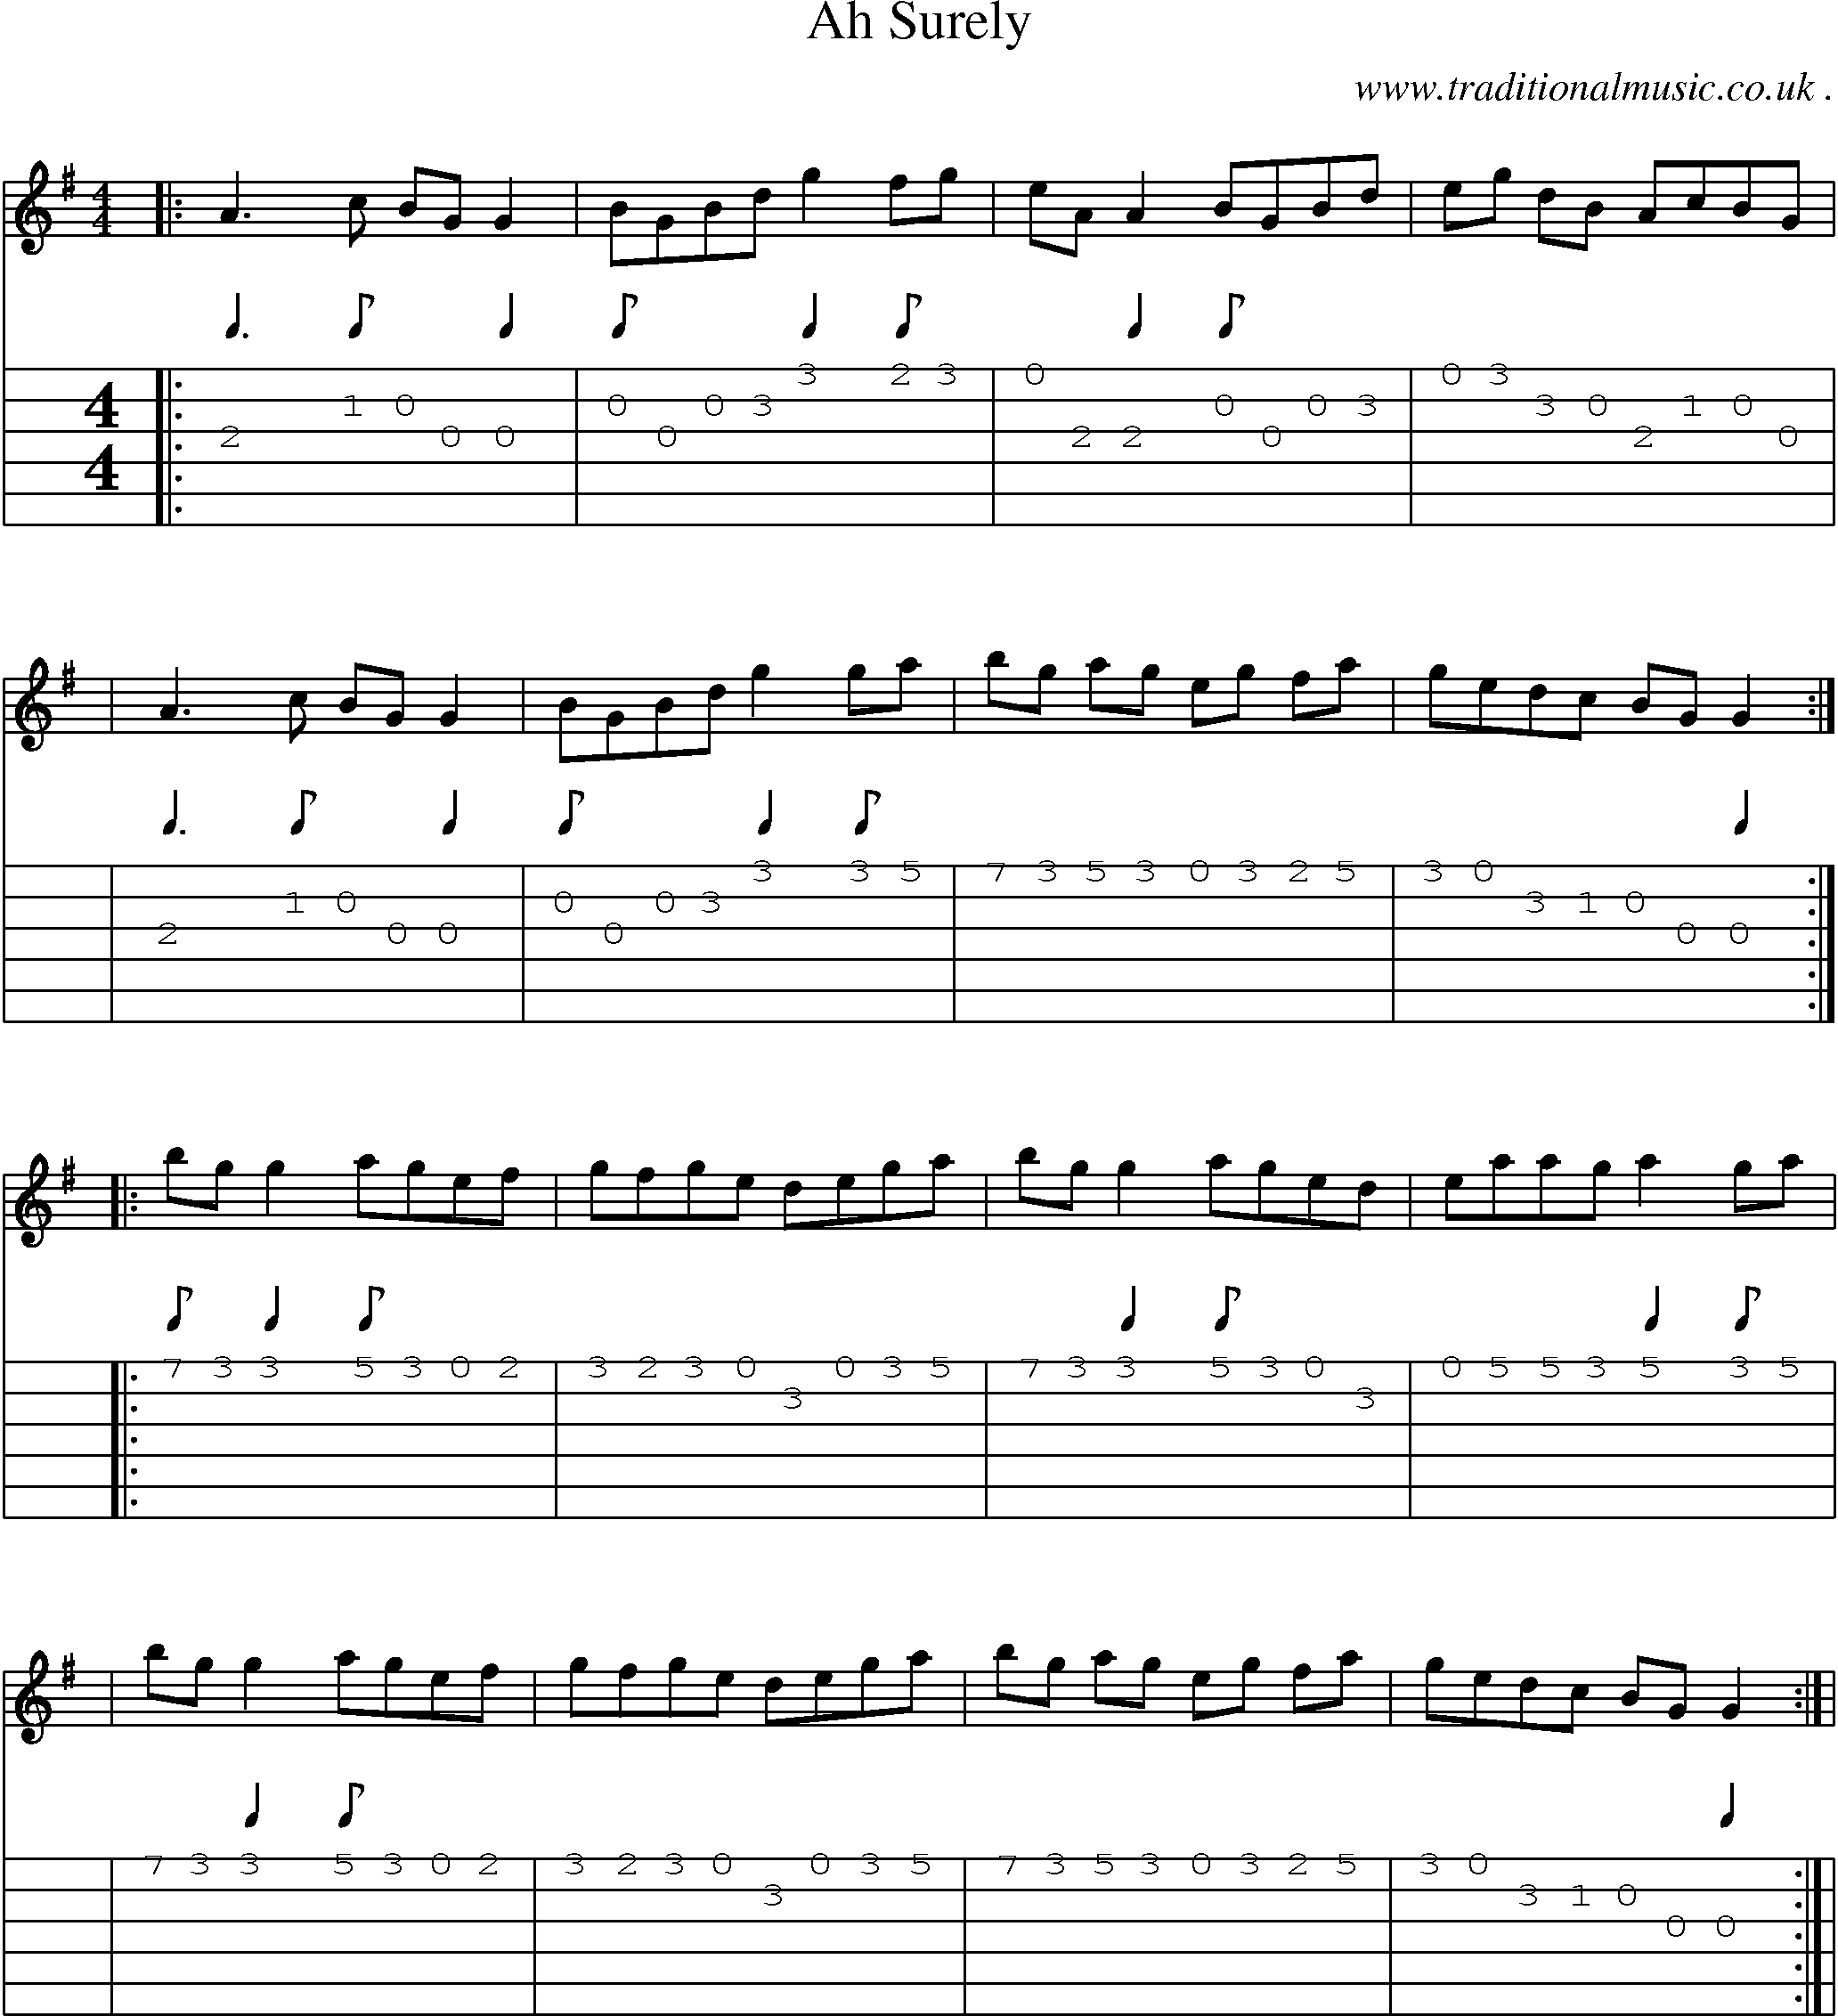 Sheet-Music and Guitar Tabs for Ah Surely